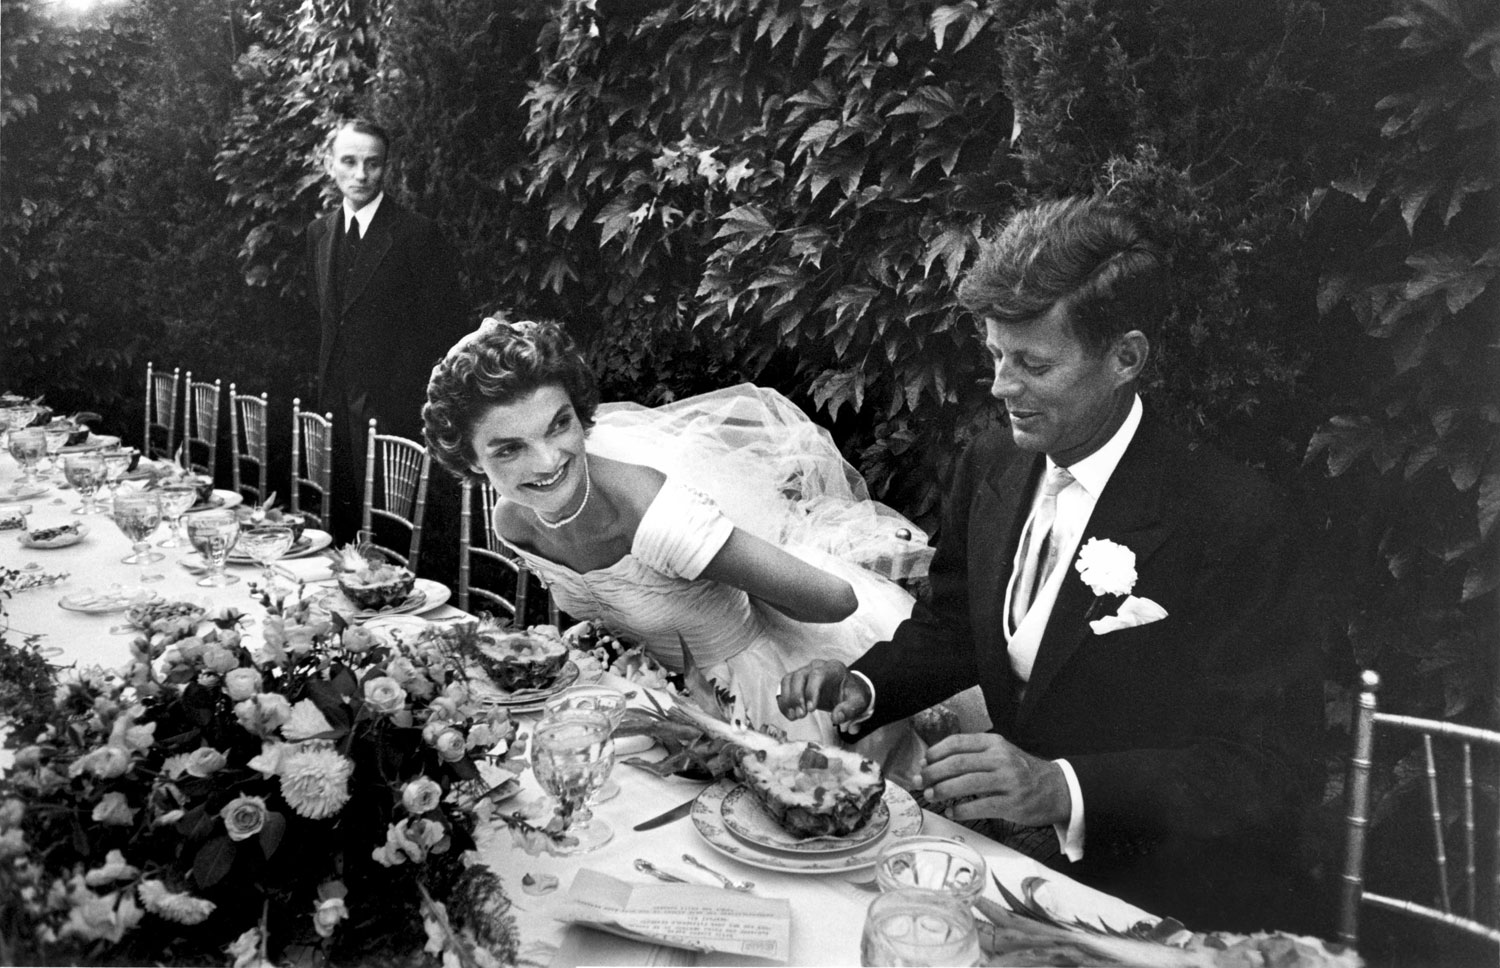 John and Jackie Kennedy at their wedding reception, September 1953.